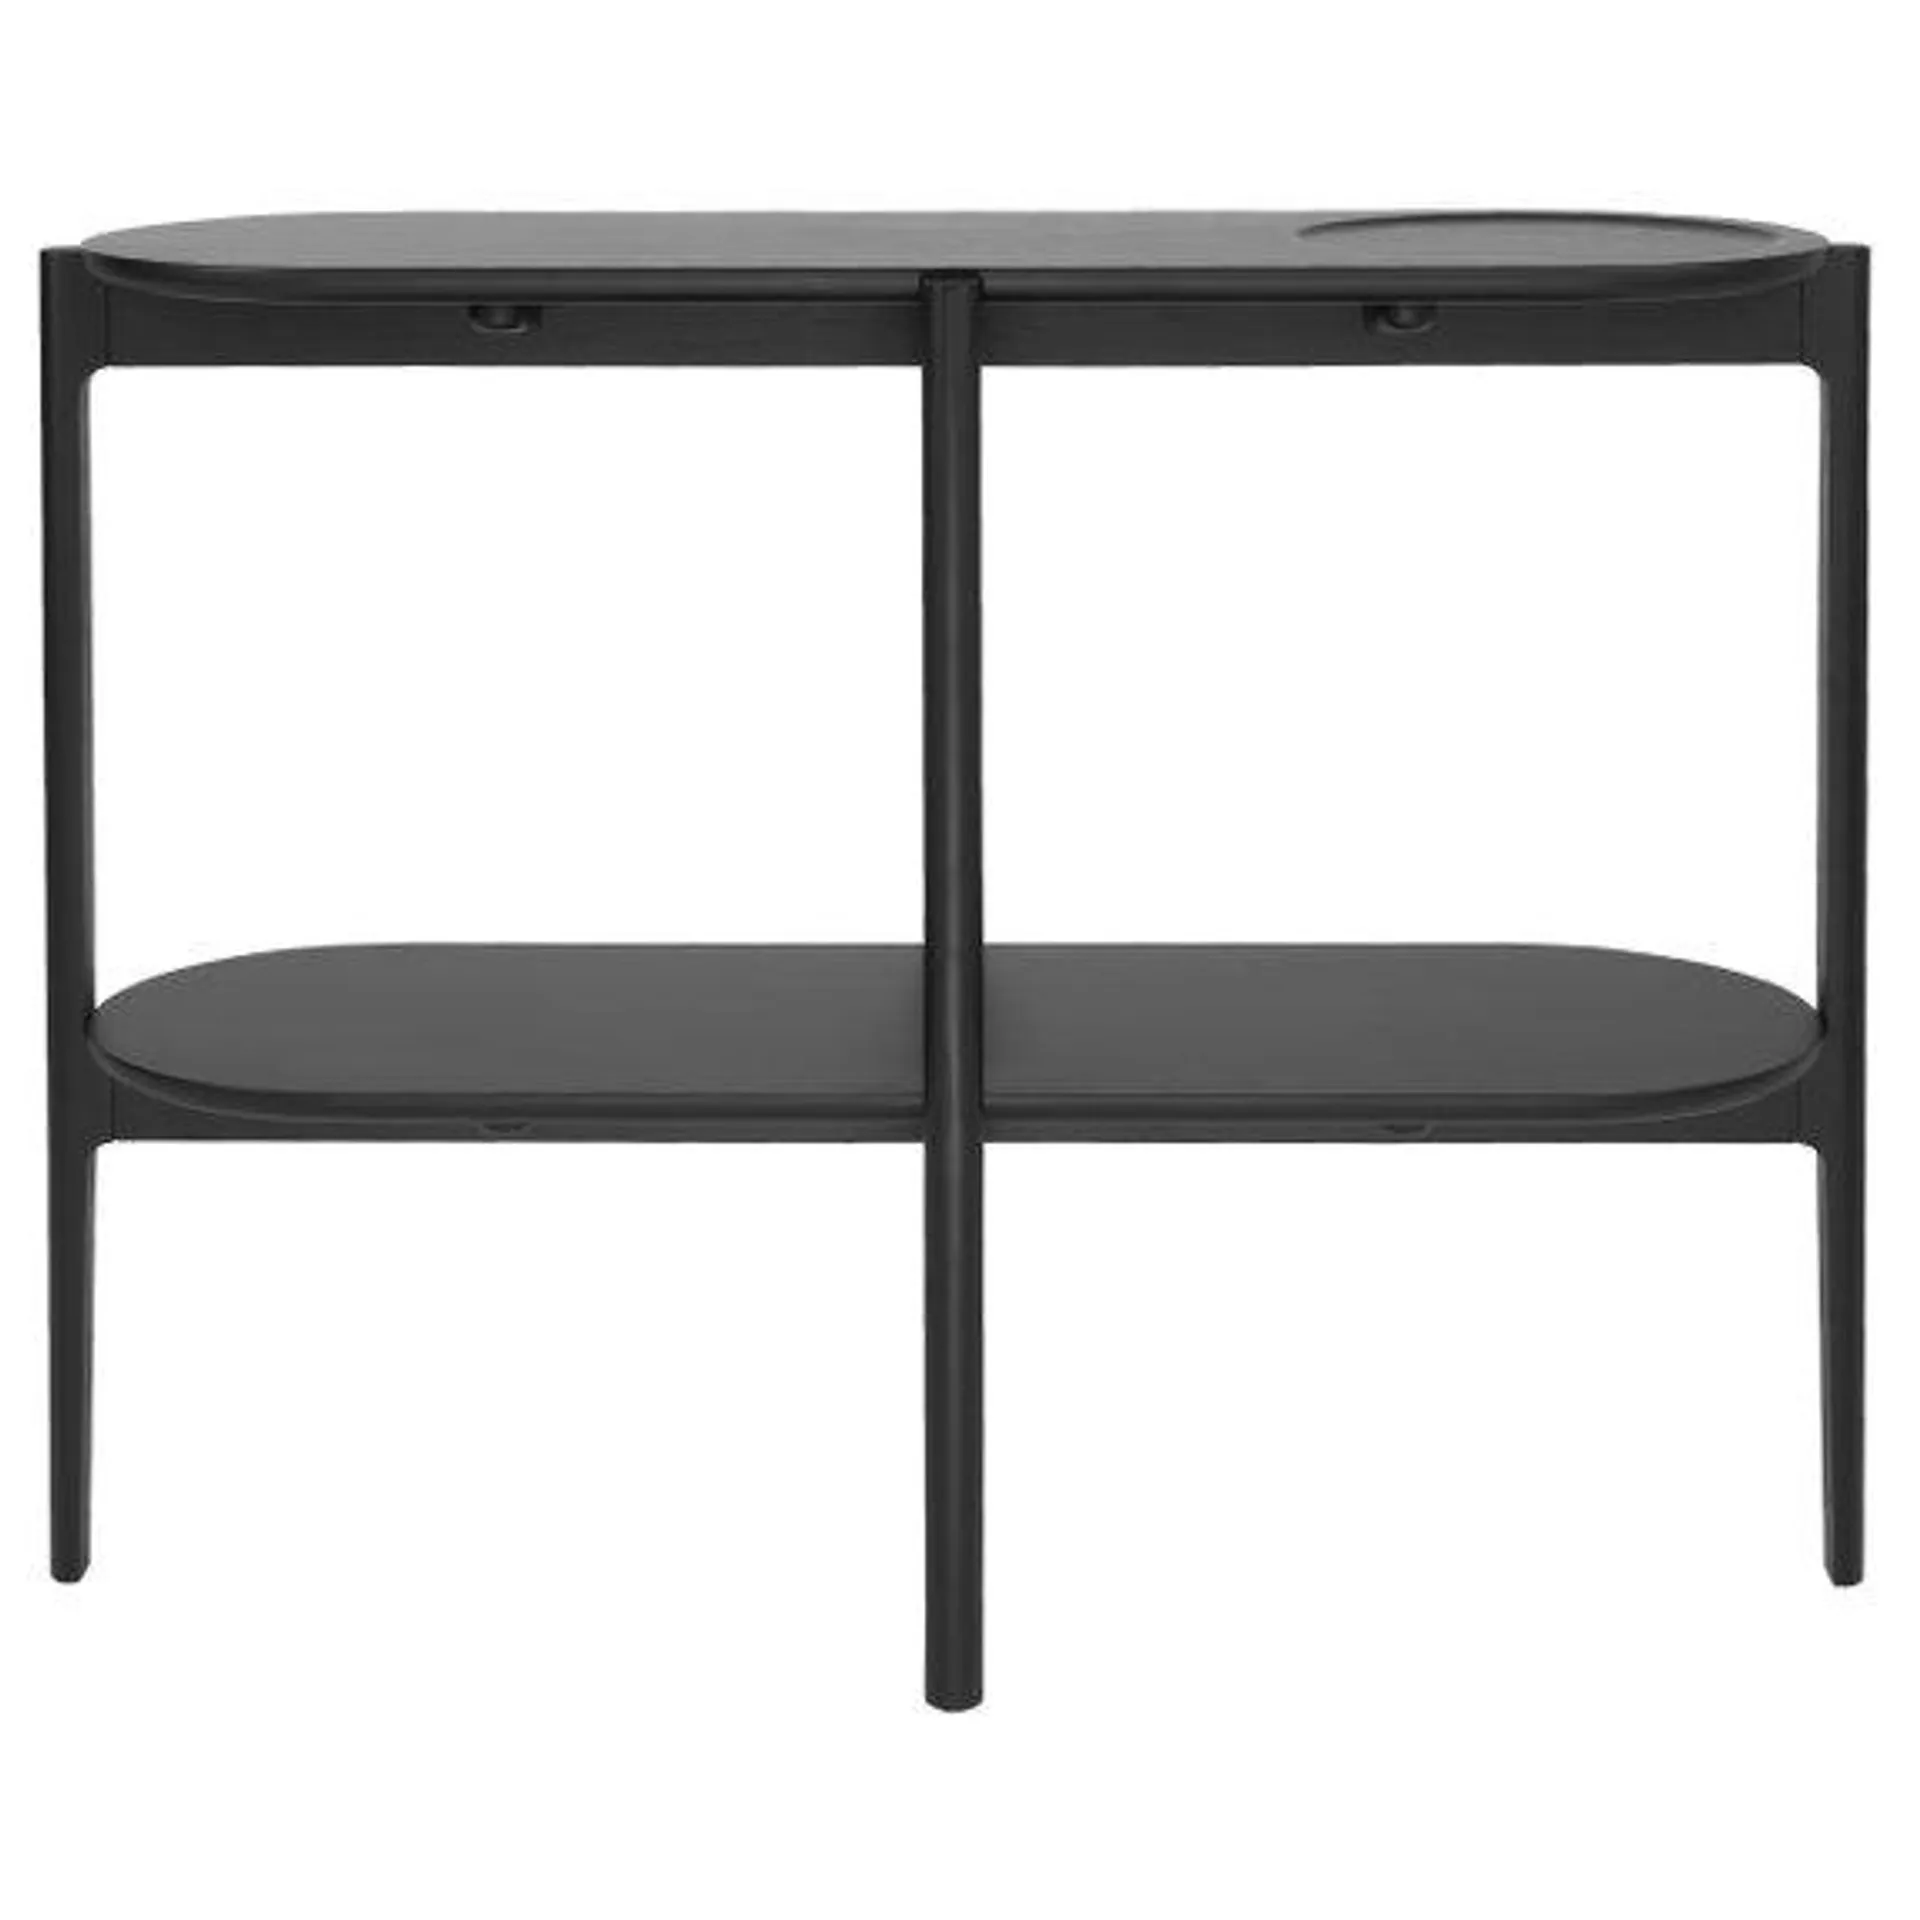 Console table in BLACK